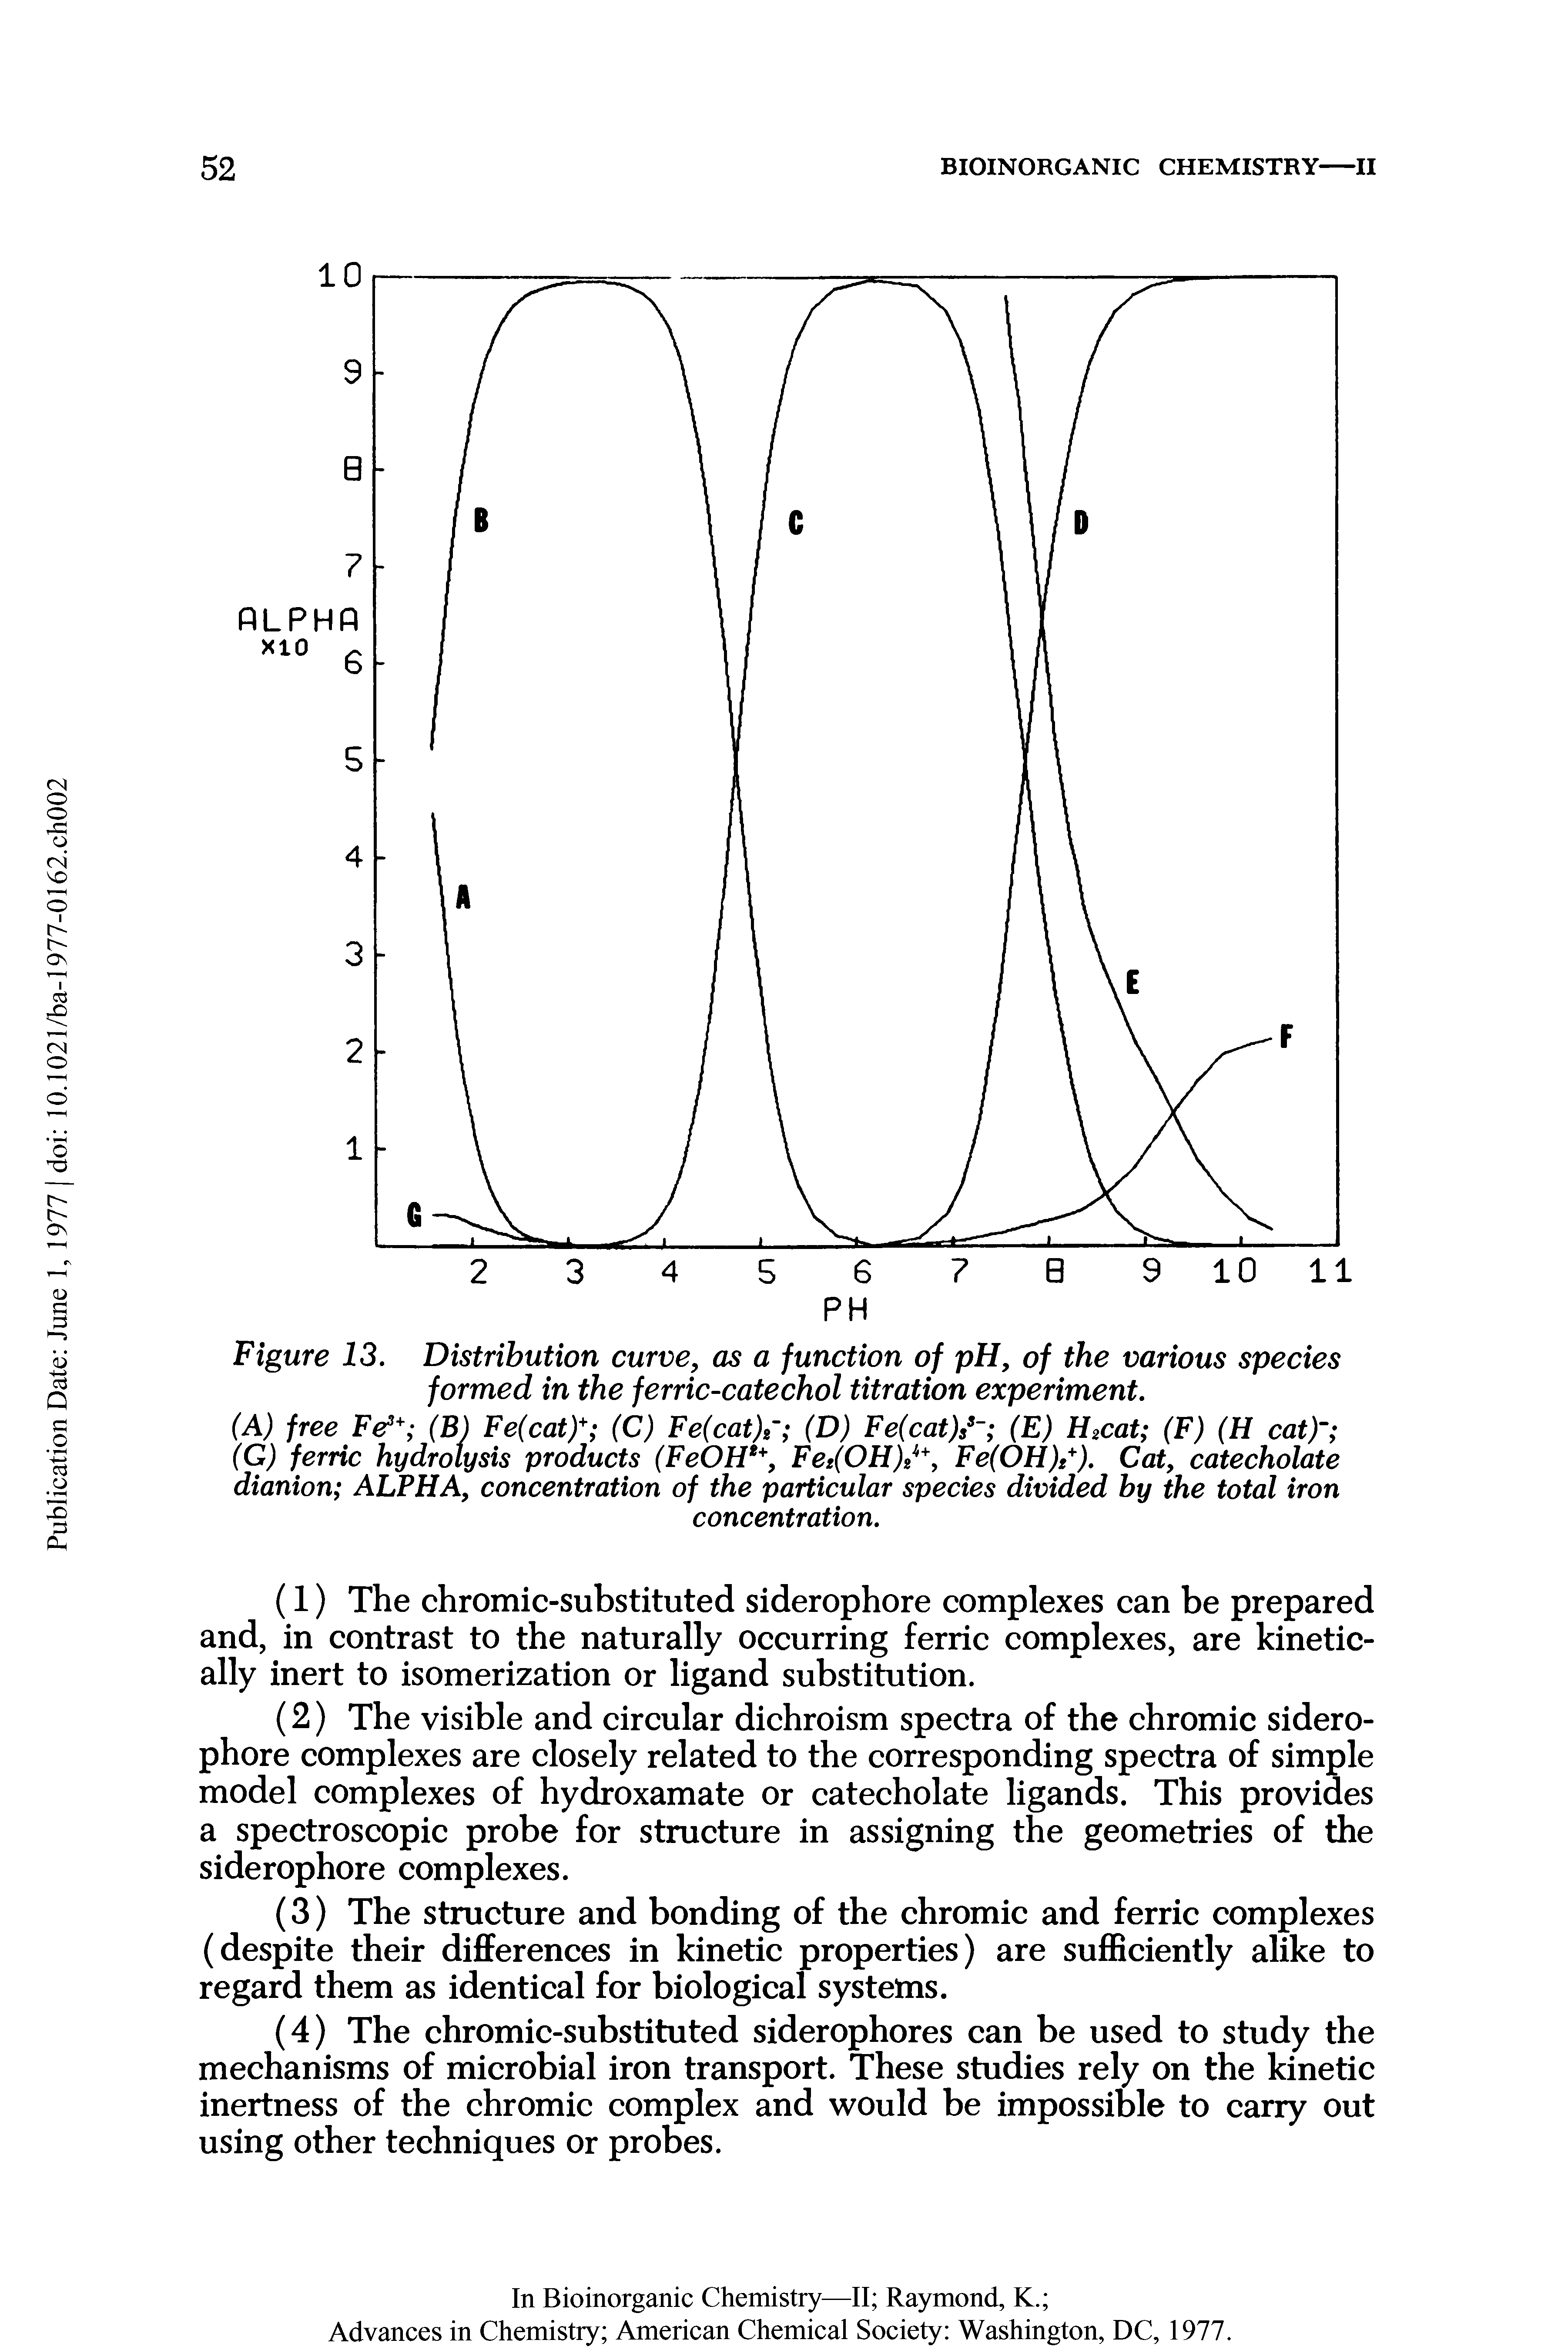 Figure 13. Distribution curve, as a function of pH, of the various species formed in the ferric-catechol titration experiment.